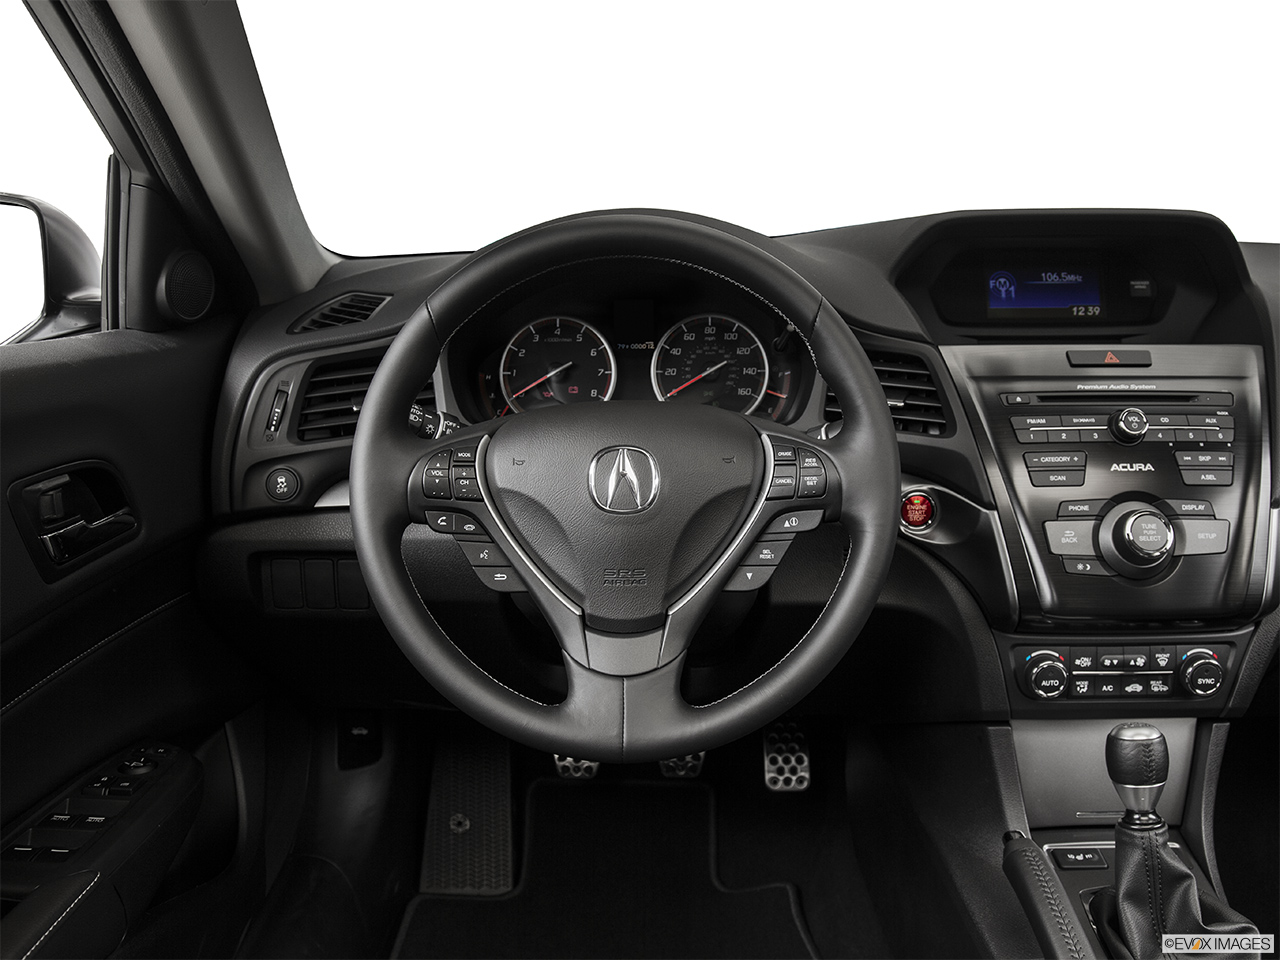 2015 Acura ILX 6-Speed Manual Steering wheel/Center Console. 